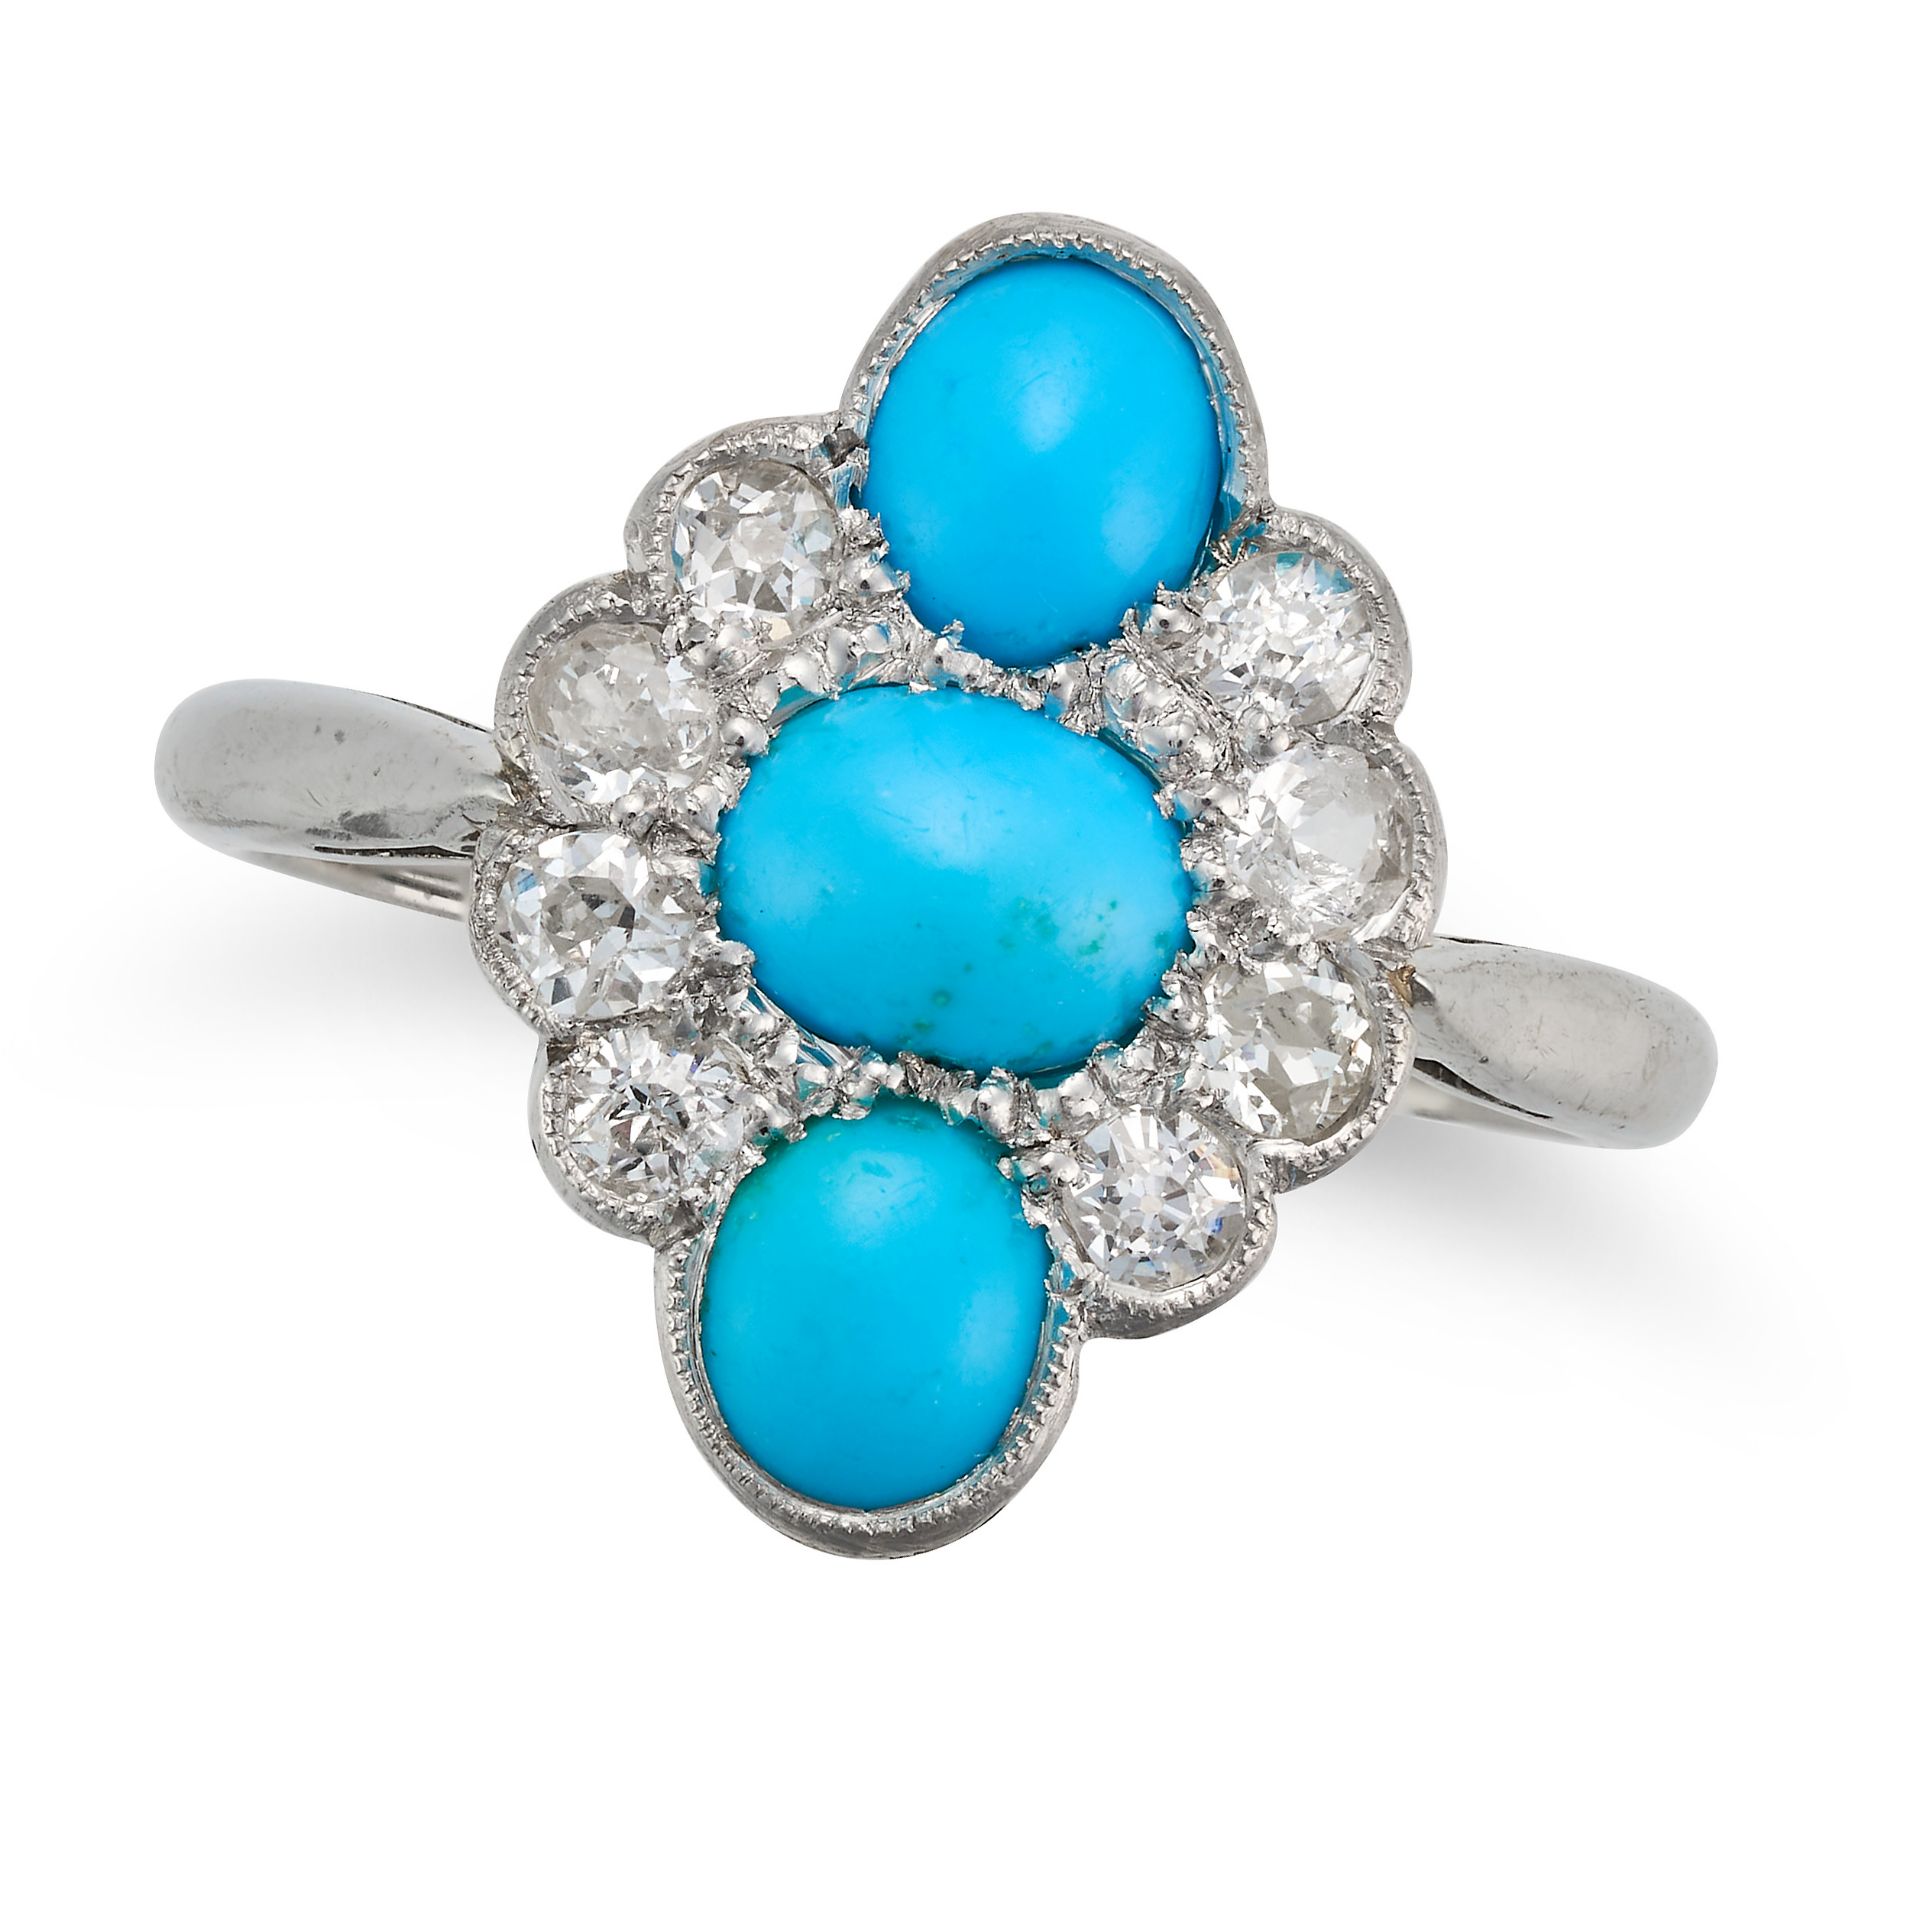 A TURQUOISE AND DIAMOND DRESS RING set with three cabochon turquoise in a border of old cut diamo...